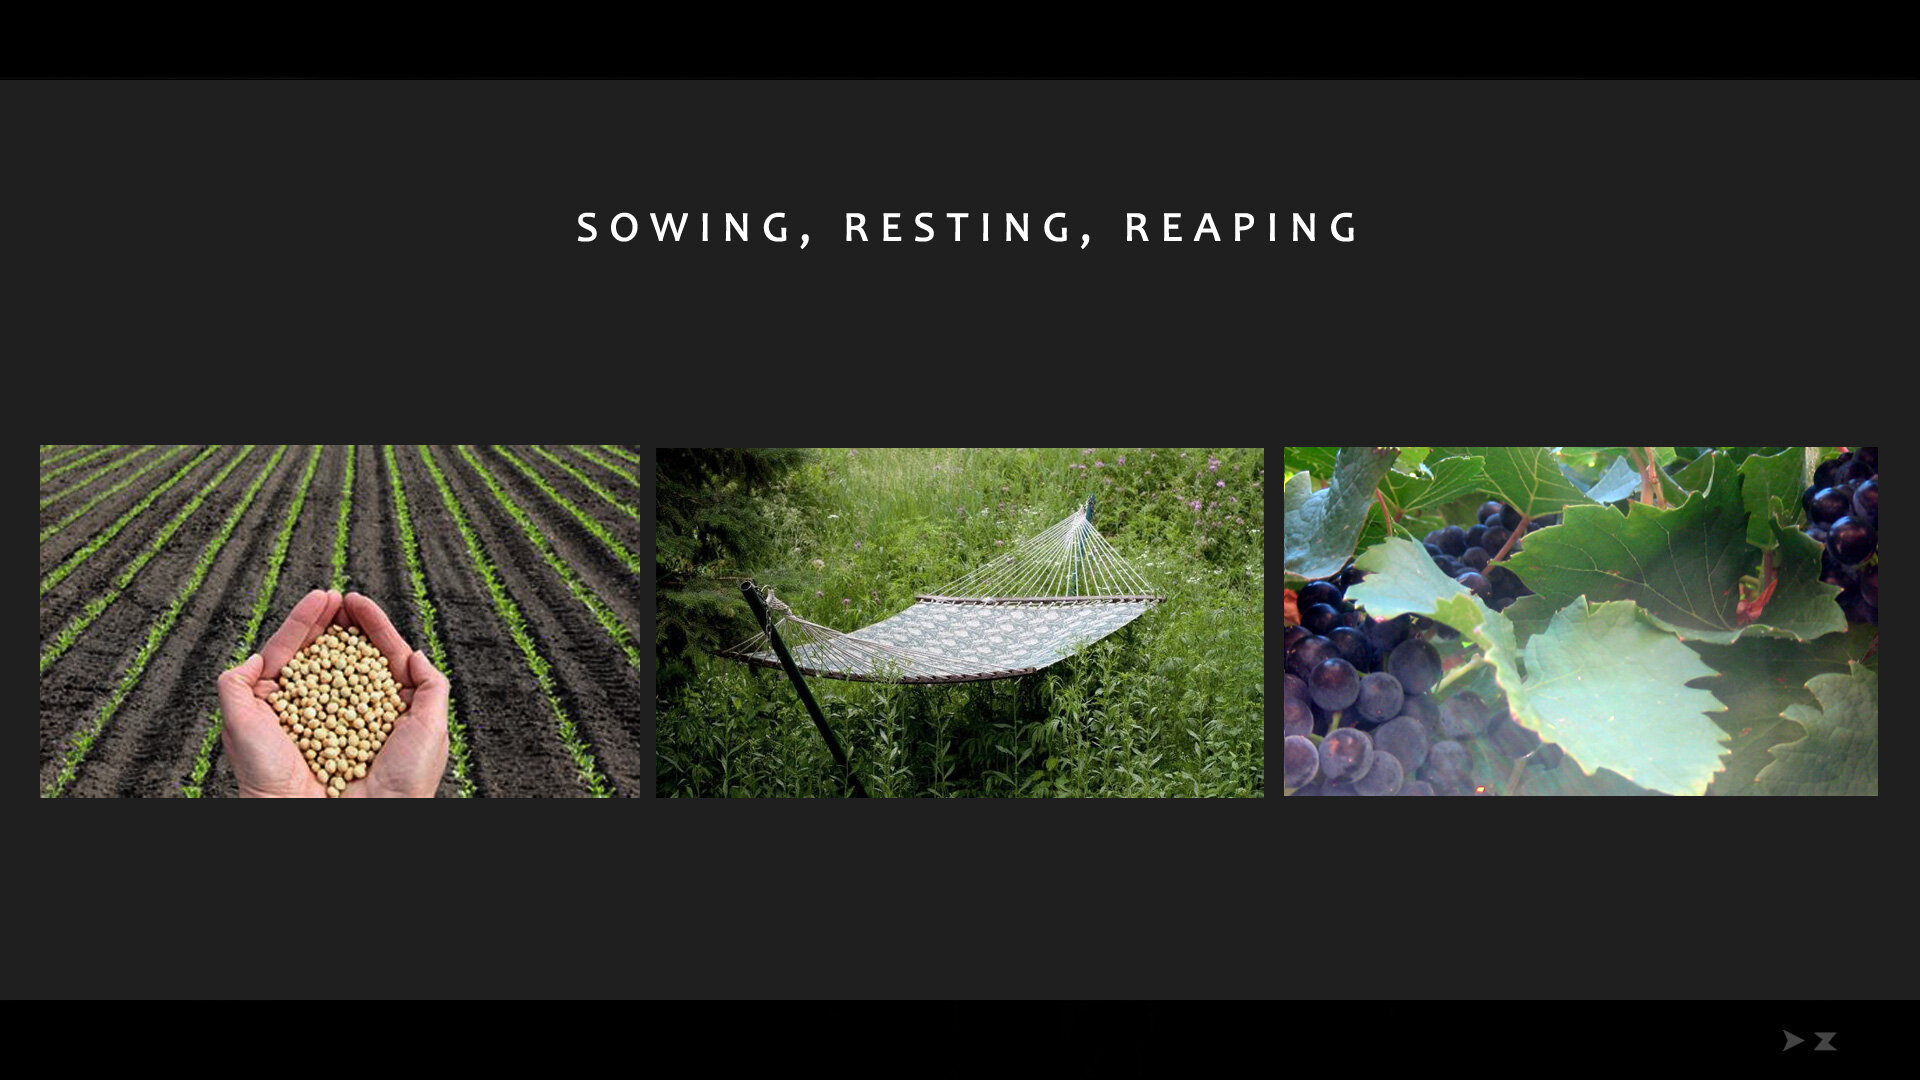 25 sowing-resting-reaping.jpg